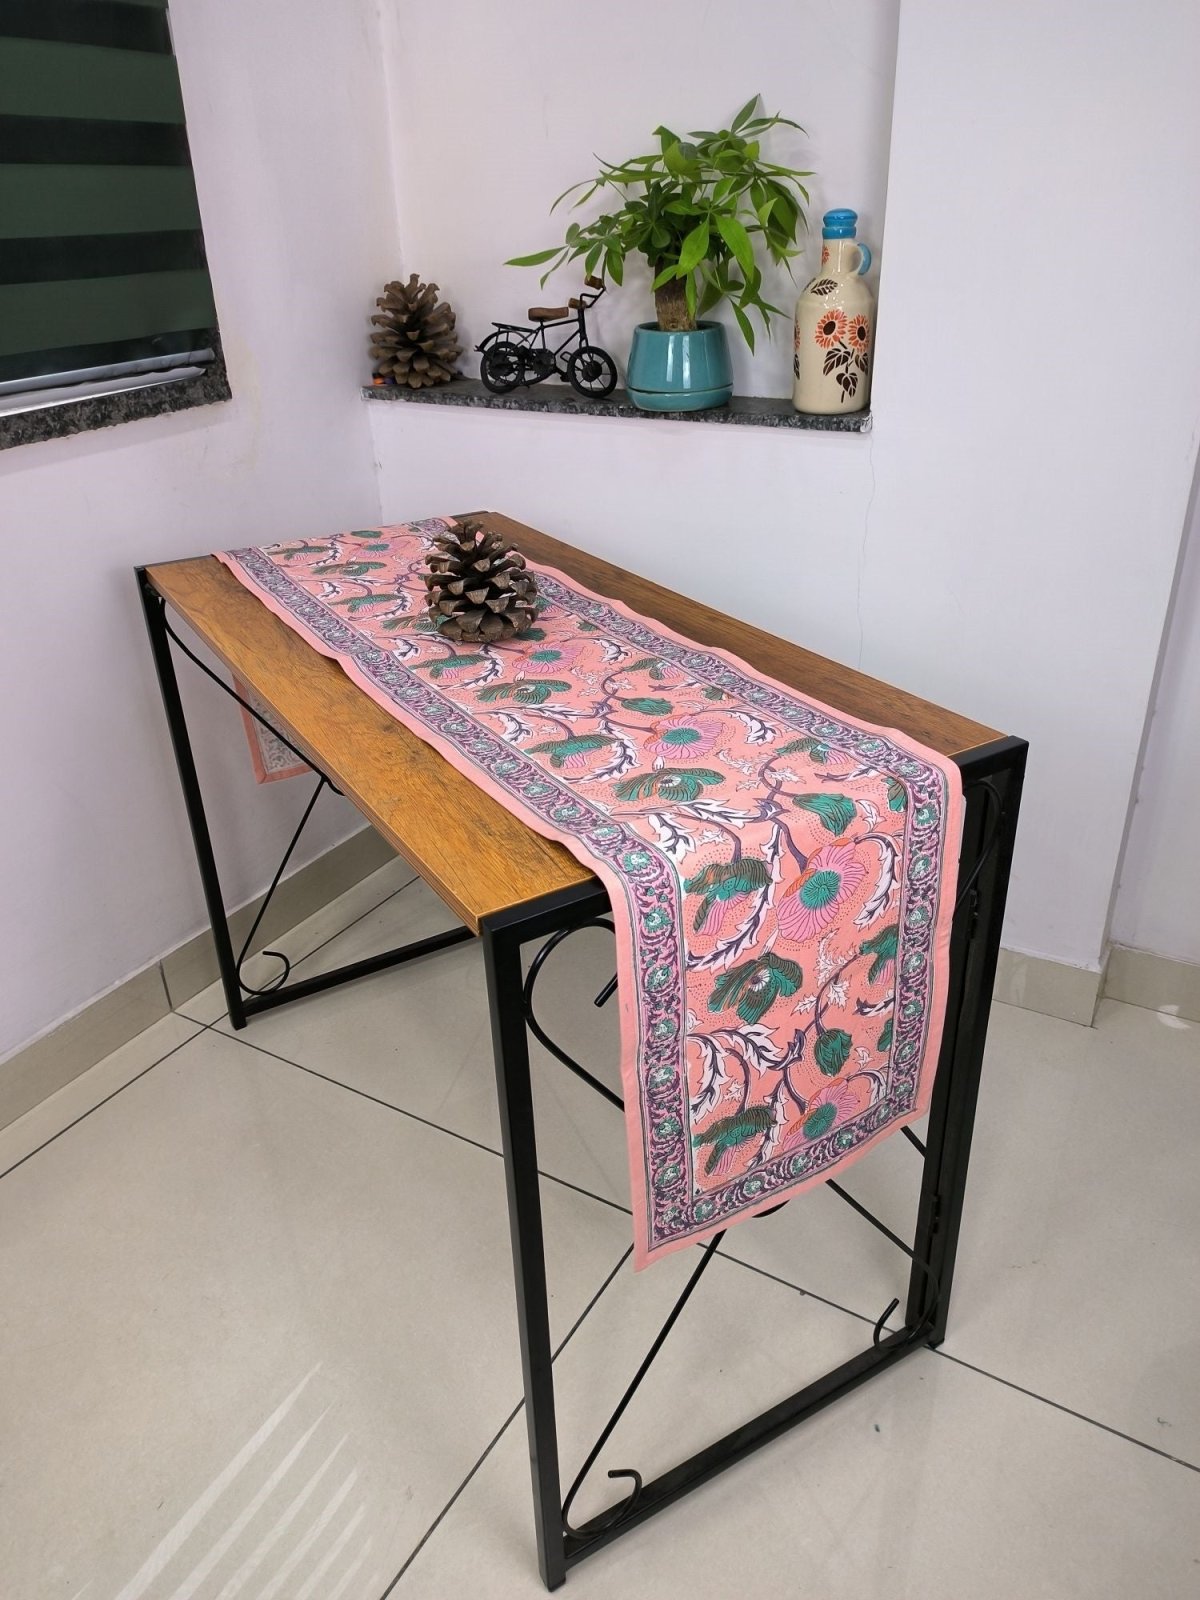 Table Runner 100% Pure Cotton Cloth Border Design | Indian Floral Printed Fall Table Runner | Housewarming Fall Gifts | Fruity Pink Hue - The Eastern Loom